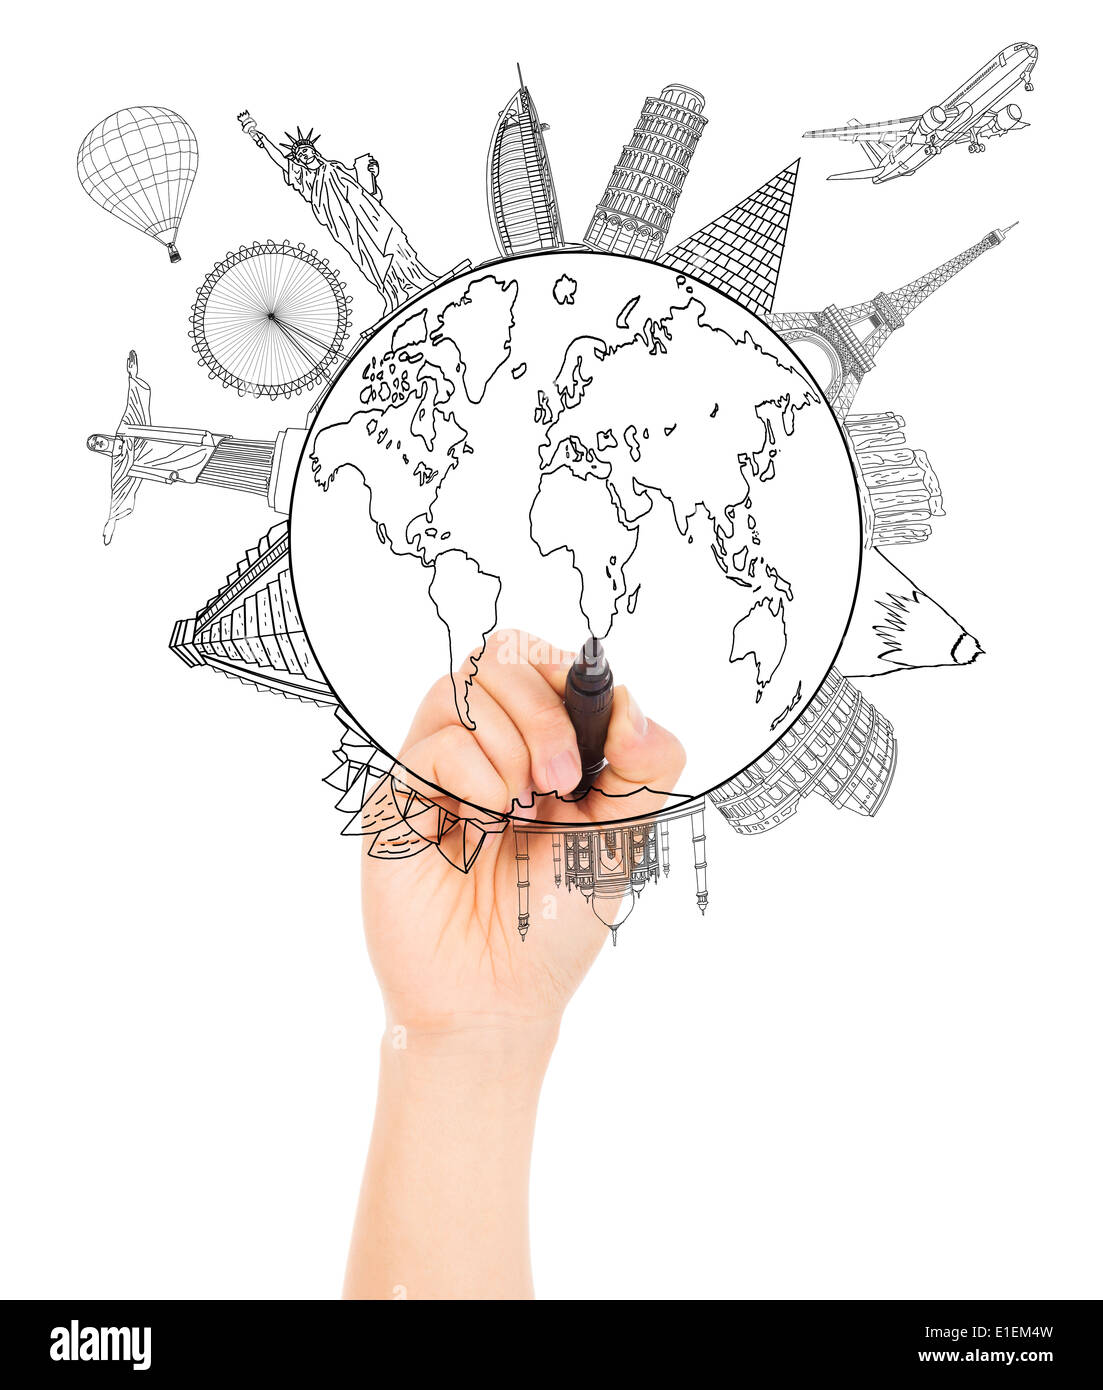 hand sketching the Earth and Global map with landmark Stock Photo